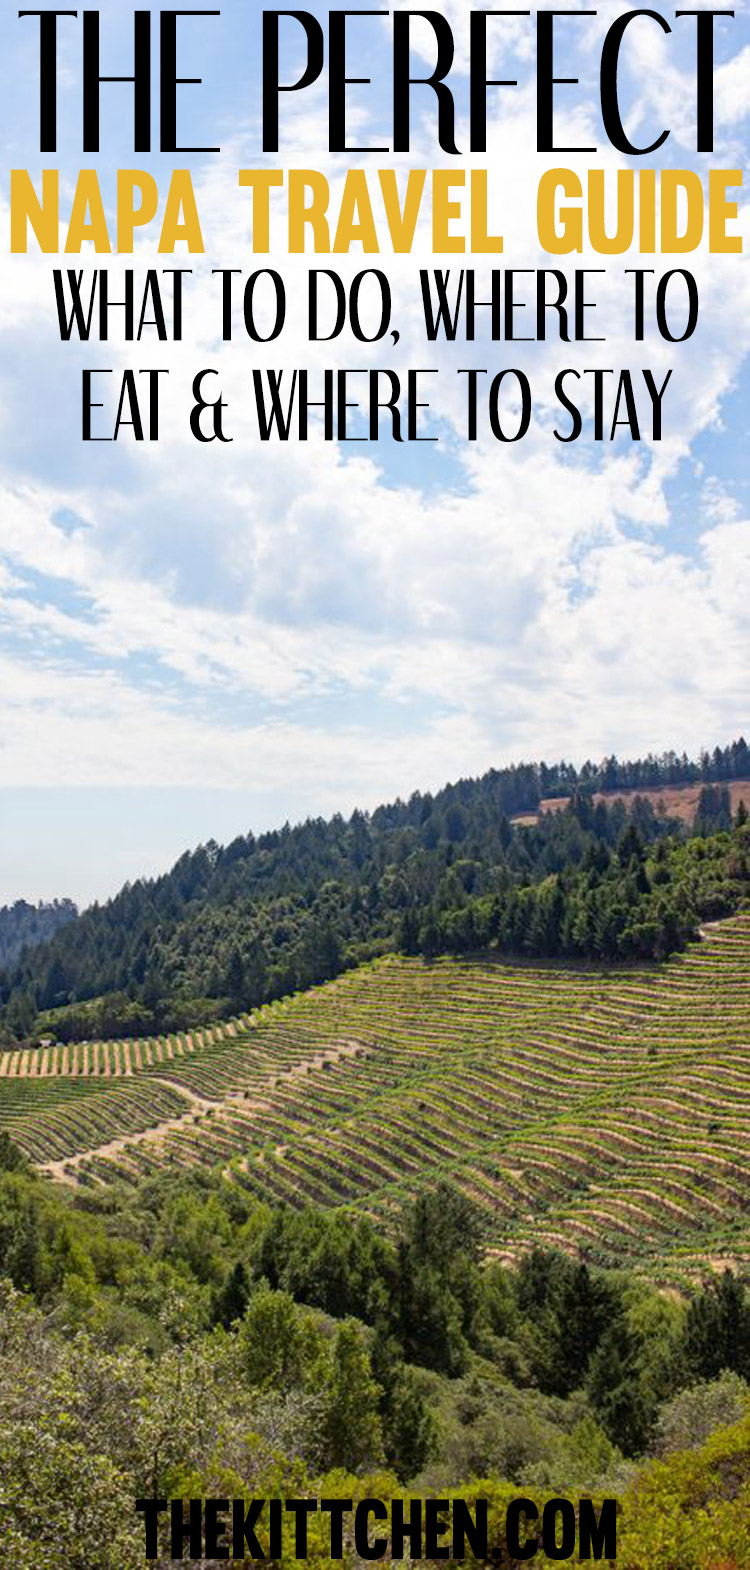 The Napa Travel Guide